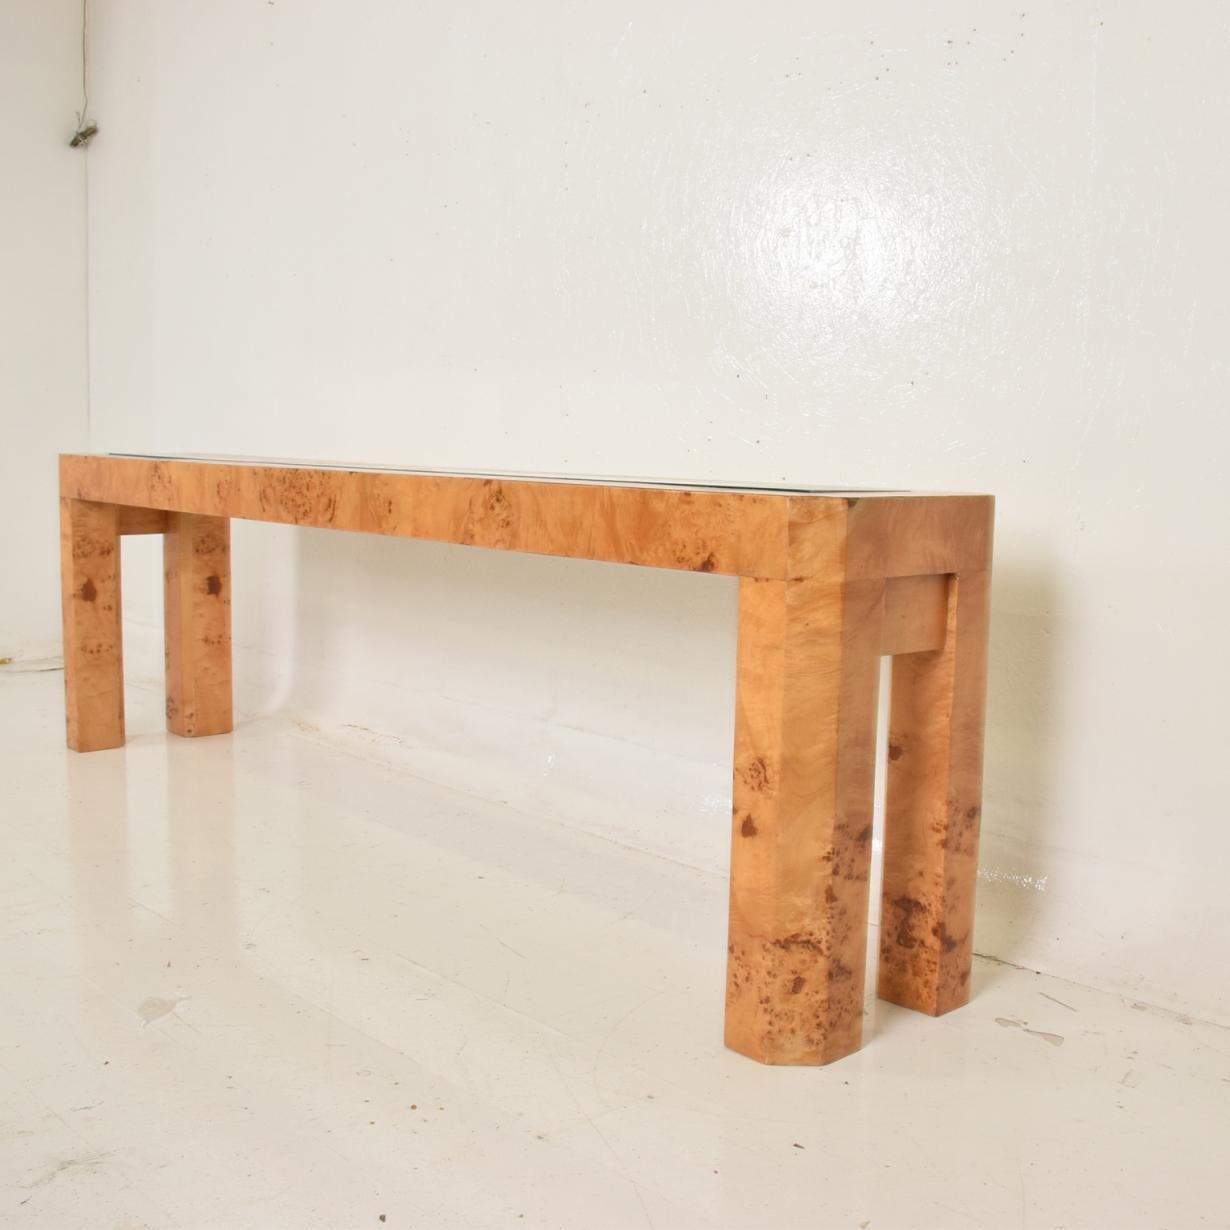 For your consideration, a Mid-Century Modern French custom ash burl wood console table.


Custom made. Unique, one of a kind. 


France, circa 1960s. No markings present from the maker. 


Dimensions: 15 3/4